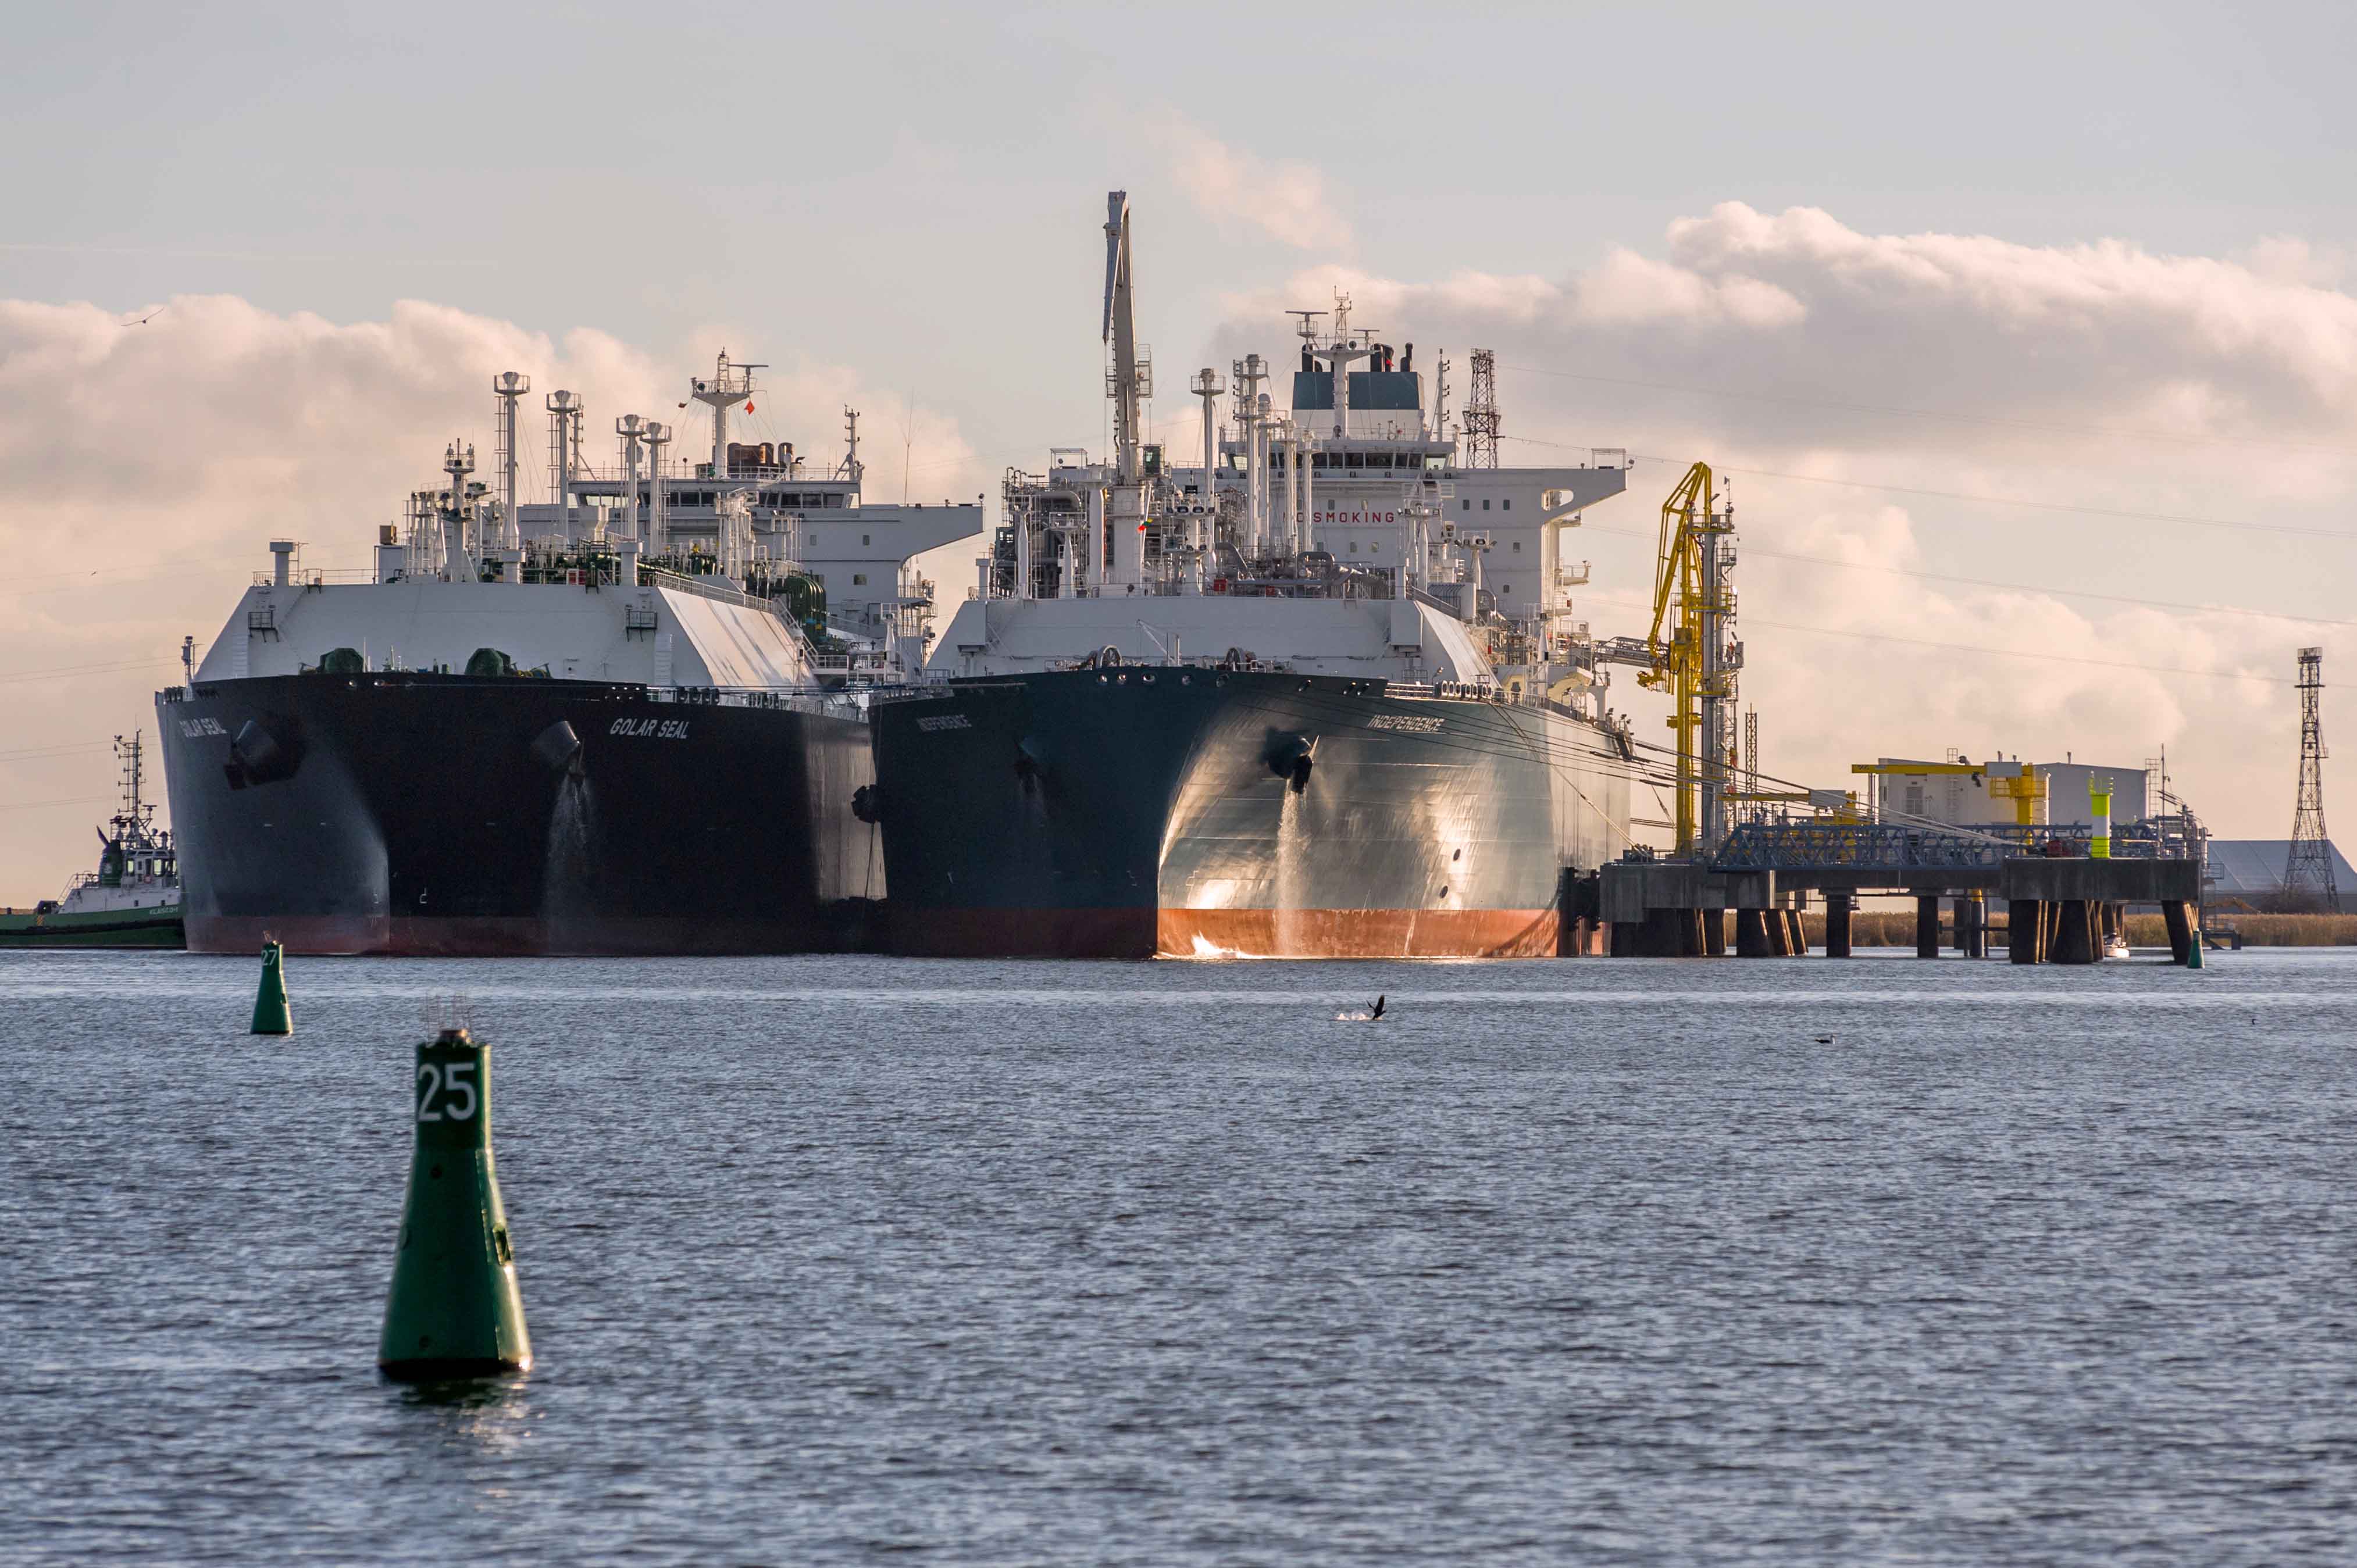 Fluor provided project management and advisory services for the Klaipedos Nafta LNG import terminal located in Klaipeda, Lithuania. (Source: Fluor, Klaipedos Nafta AB)